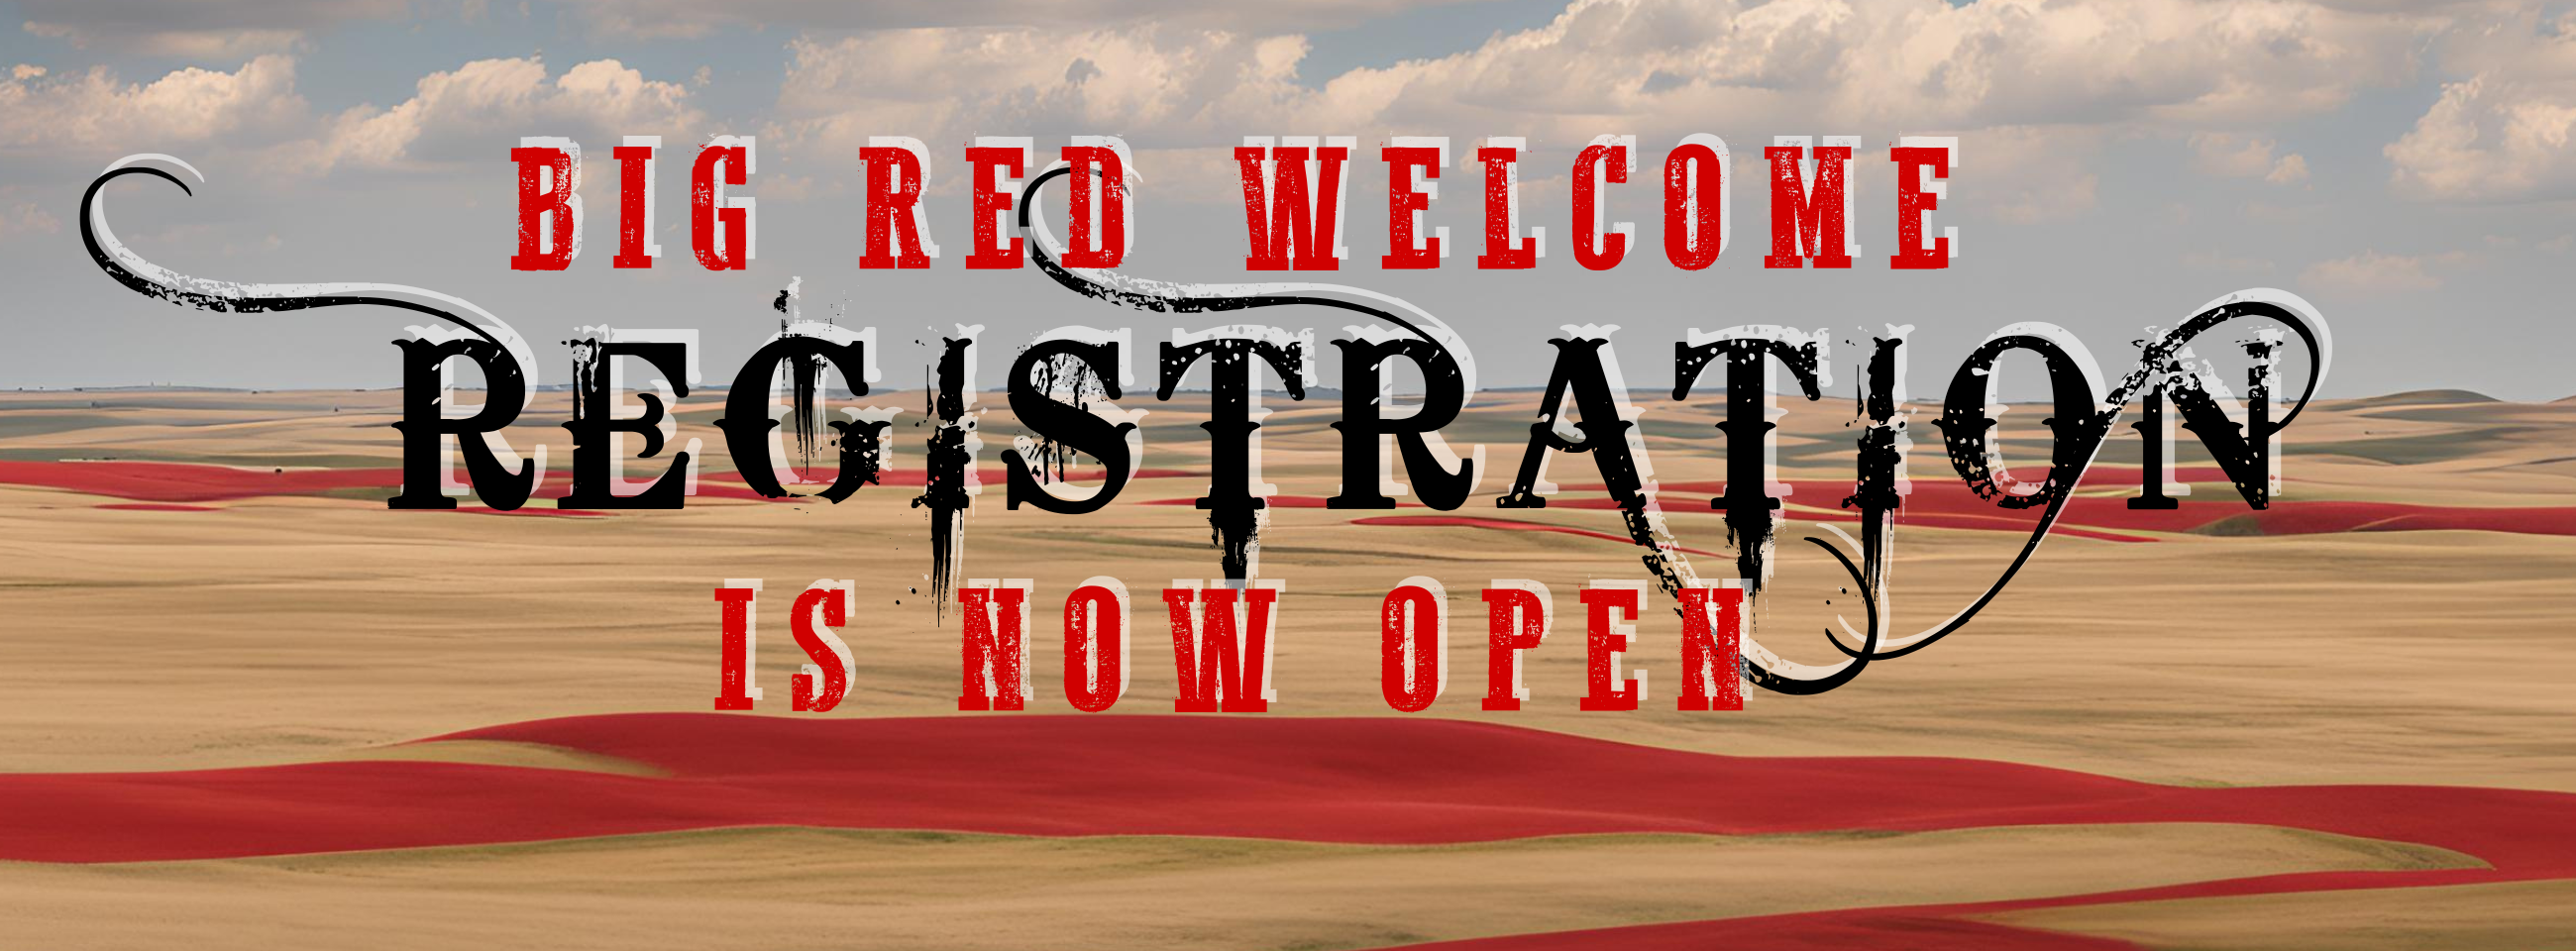 Big Red Welcome Registration is now open!